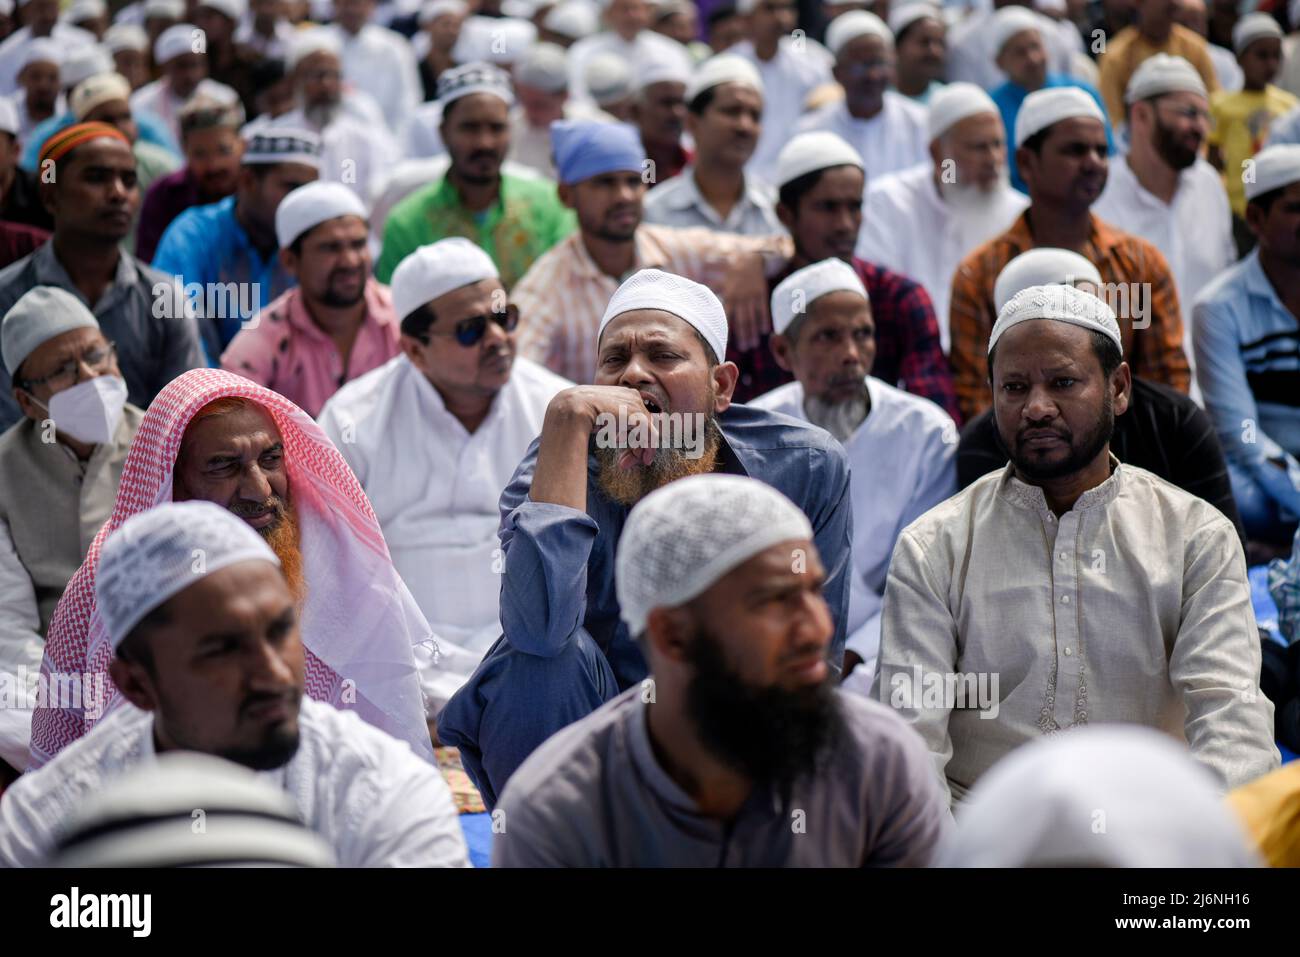 Guwahati, Assam, India. 03rd May, 2022. Muslim people offer prayer at a Eidgah to start the Eid al-Fitr festival, which marks the end of their holy fasting month of Ramadan, in Guwahati, Assam, India on May 03, 2022. Credit: David Talukdar/Alamy Live News Stock Photo